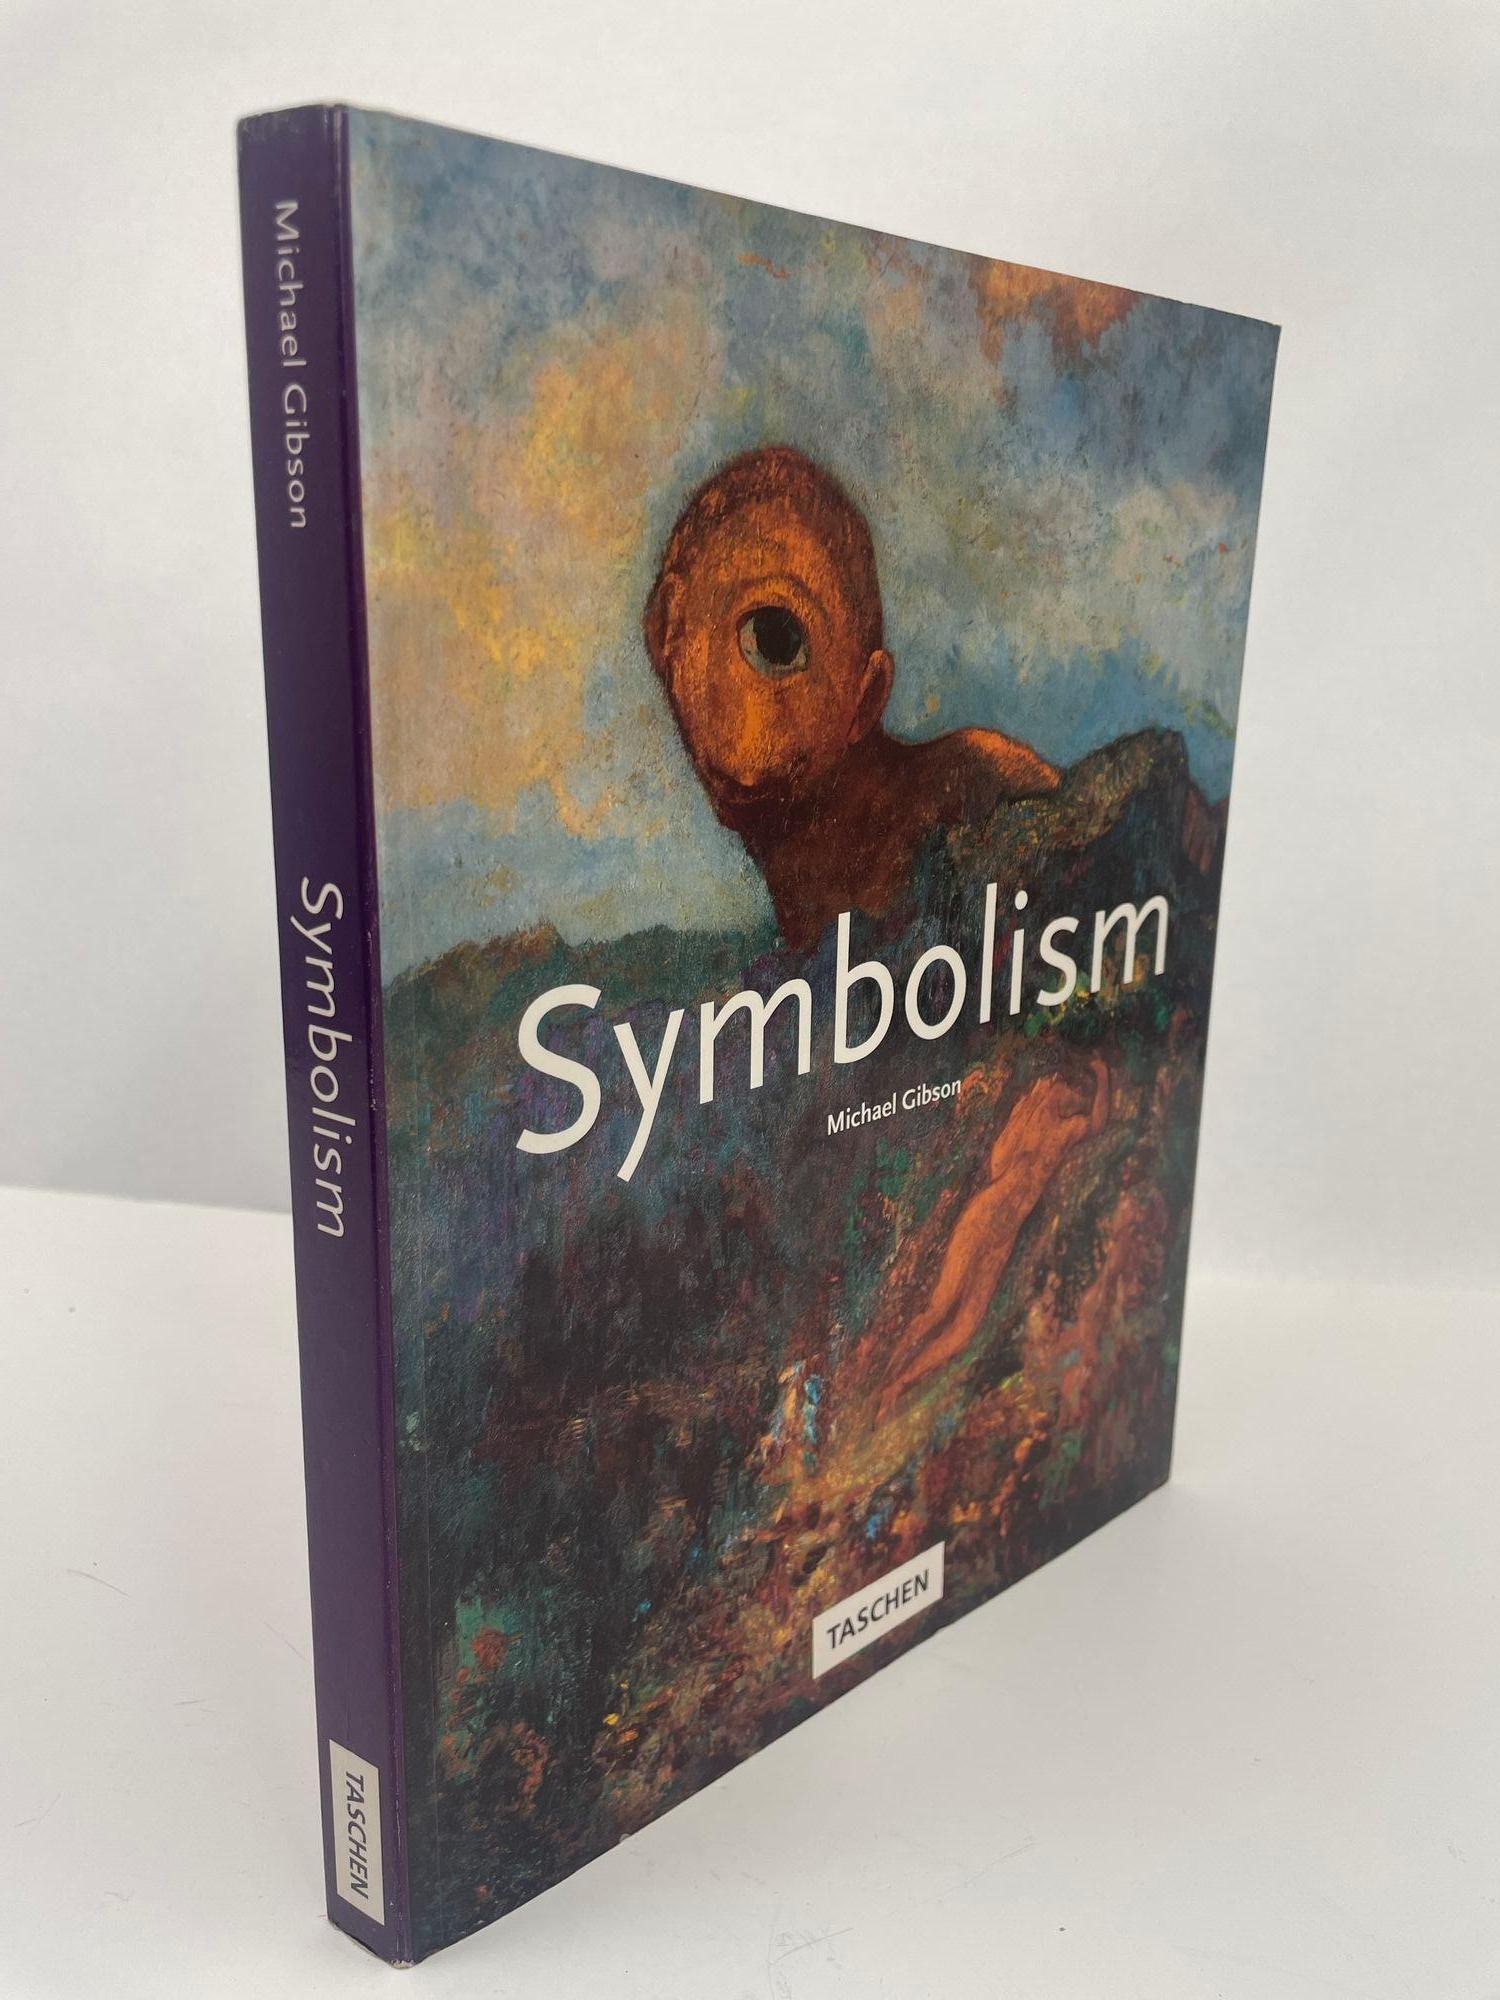 Symbolism Paperback Book 1st Ed. 1995 by Michael Gibson In Good Condition For Sale In North Hollywood, CA